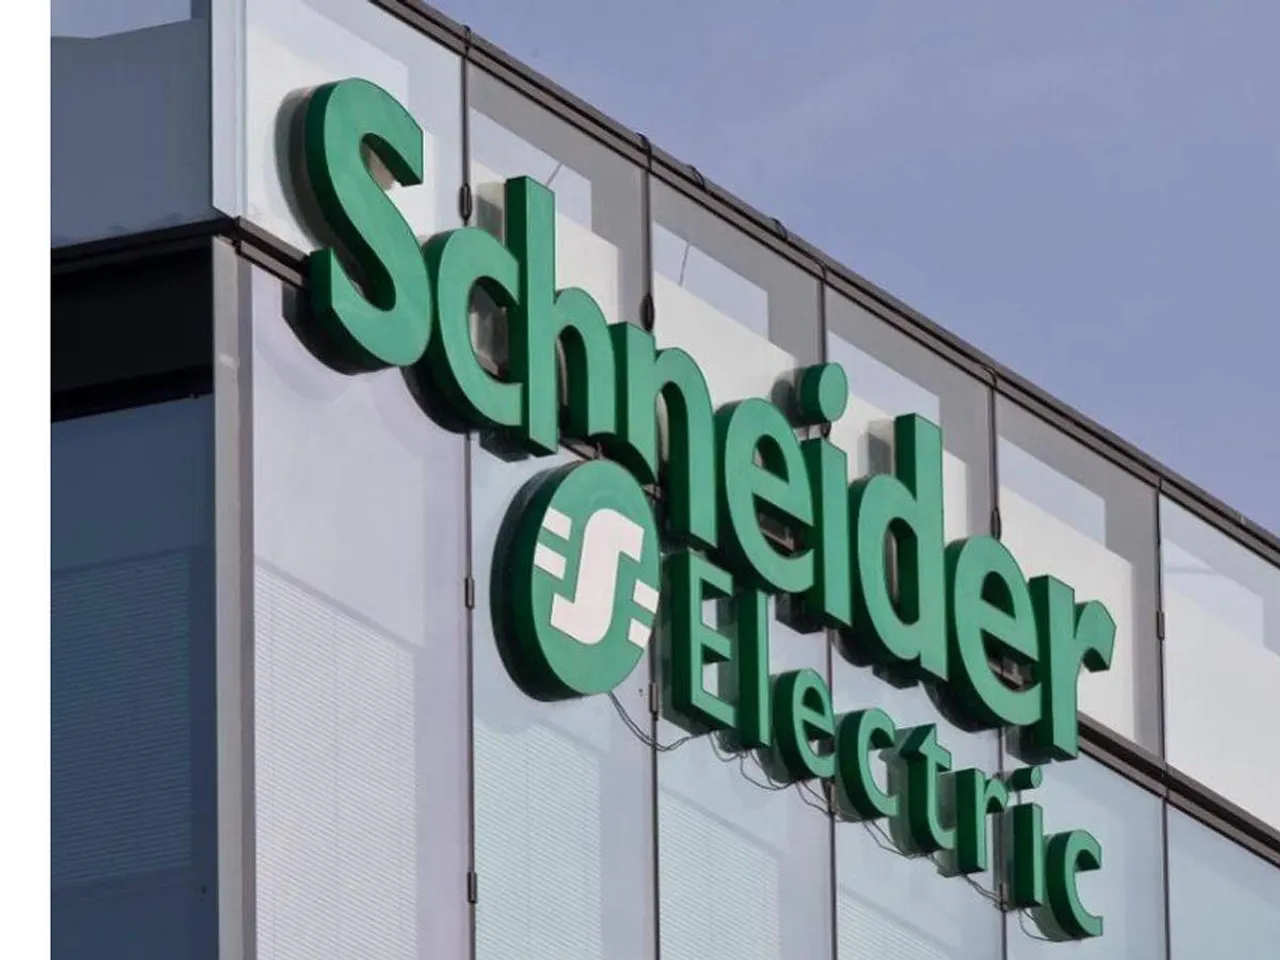 Grab Massive Discounts on Schneider Electric’s ‘Wiser Smart Doorbell’ During the Amazon Prime Day sale